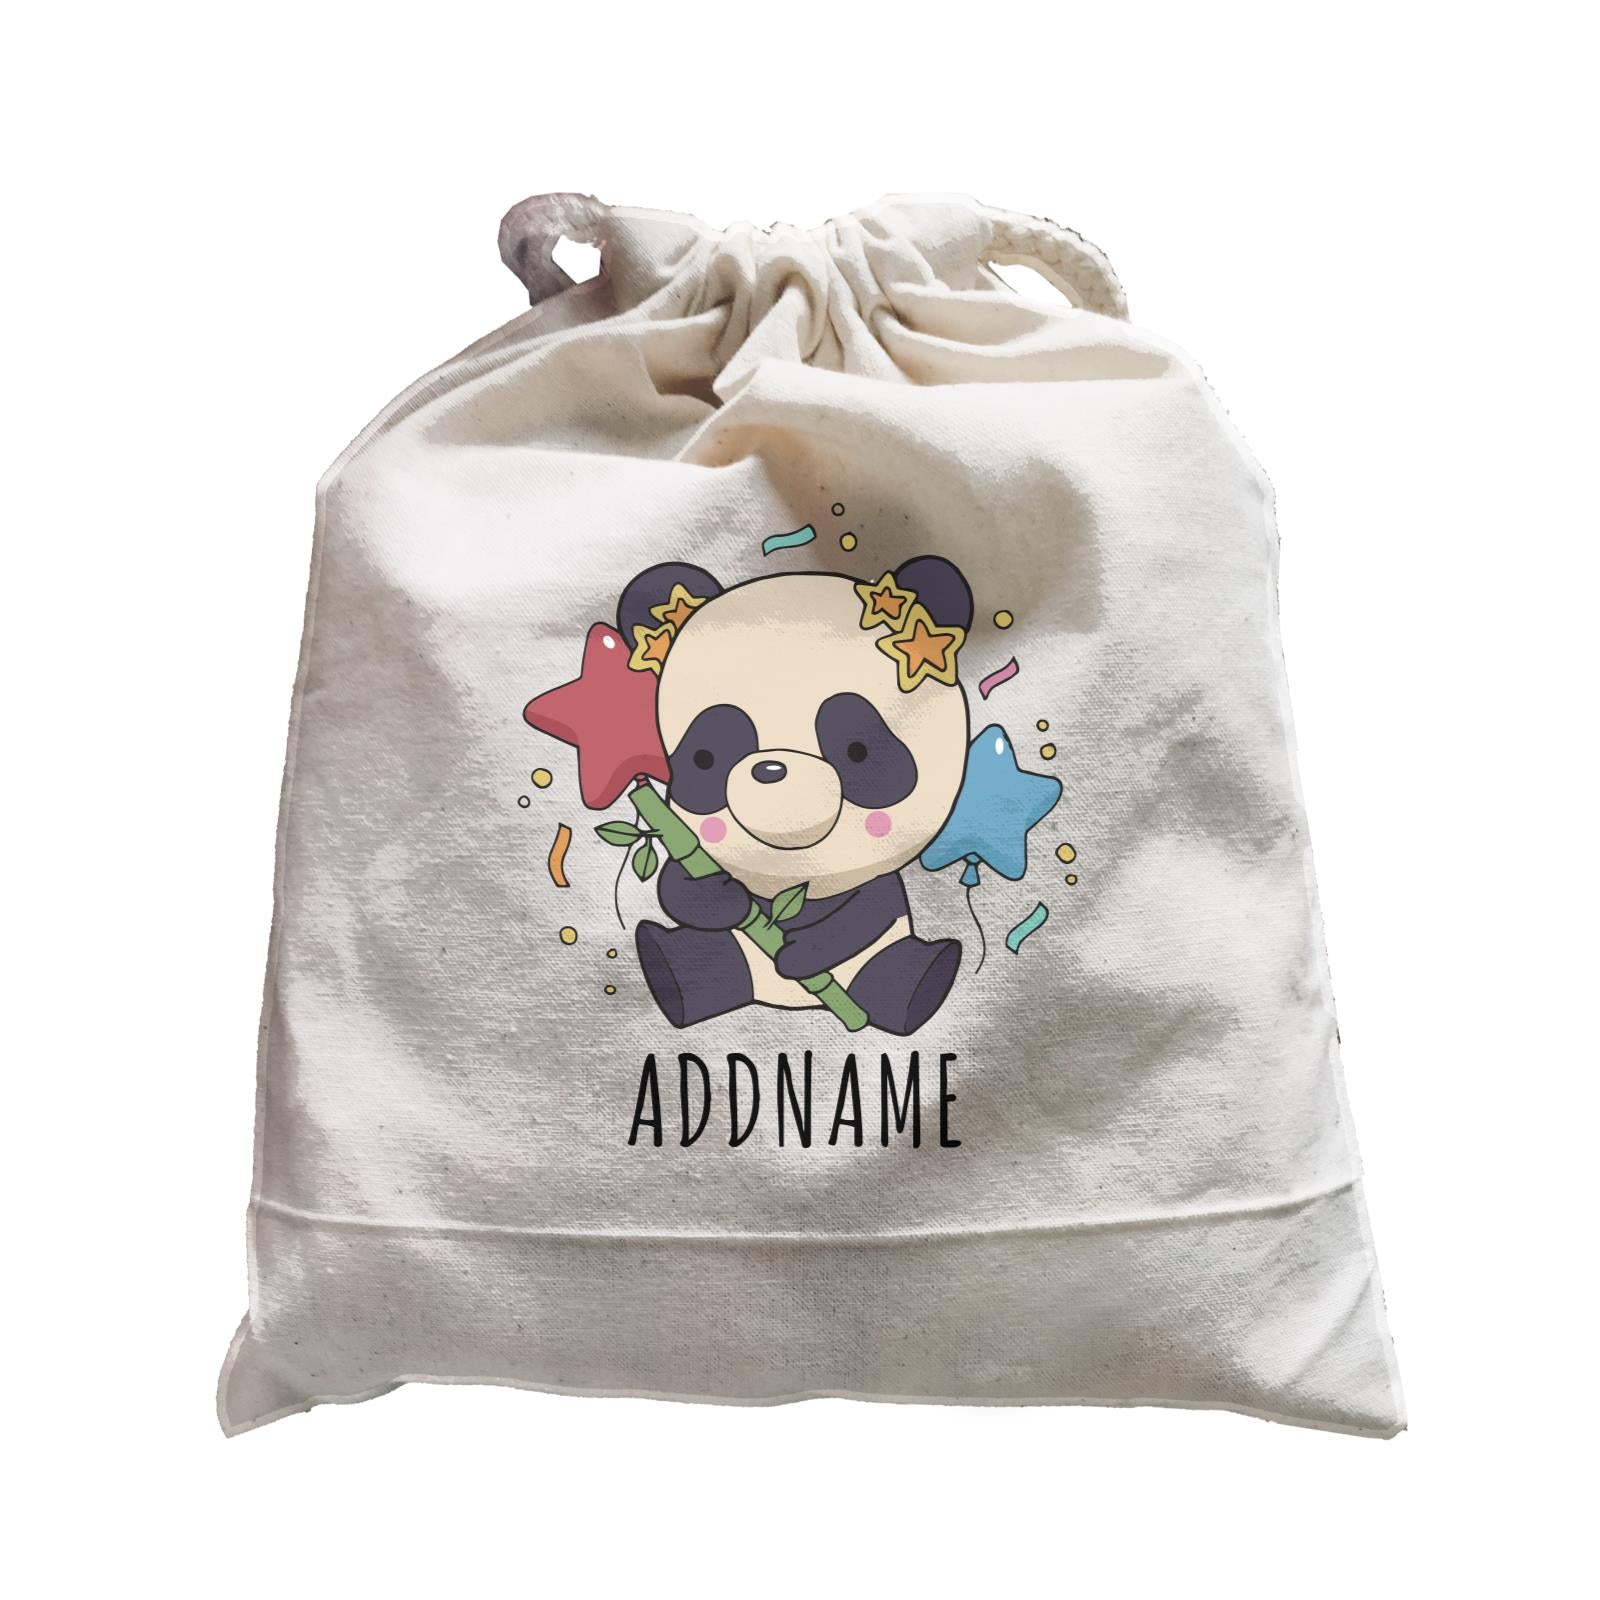 Birthday Sketch Animals Panda with Party Hat Holding Bamboo Addname Satchel